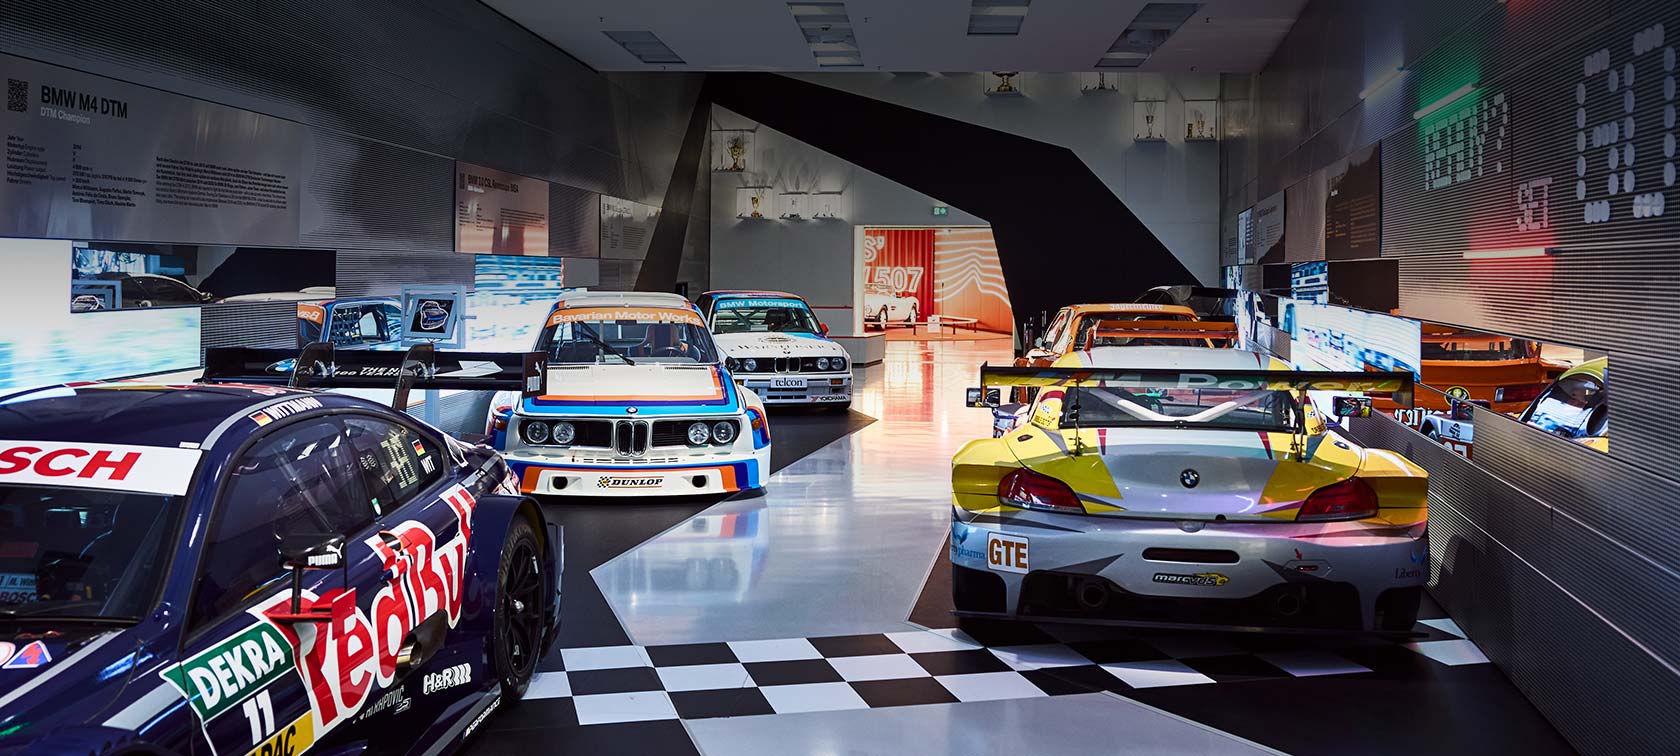 DTM vehicles of the BMW Motorsport Series in the BMW Museum